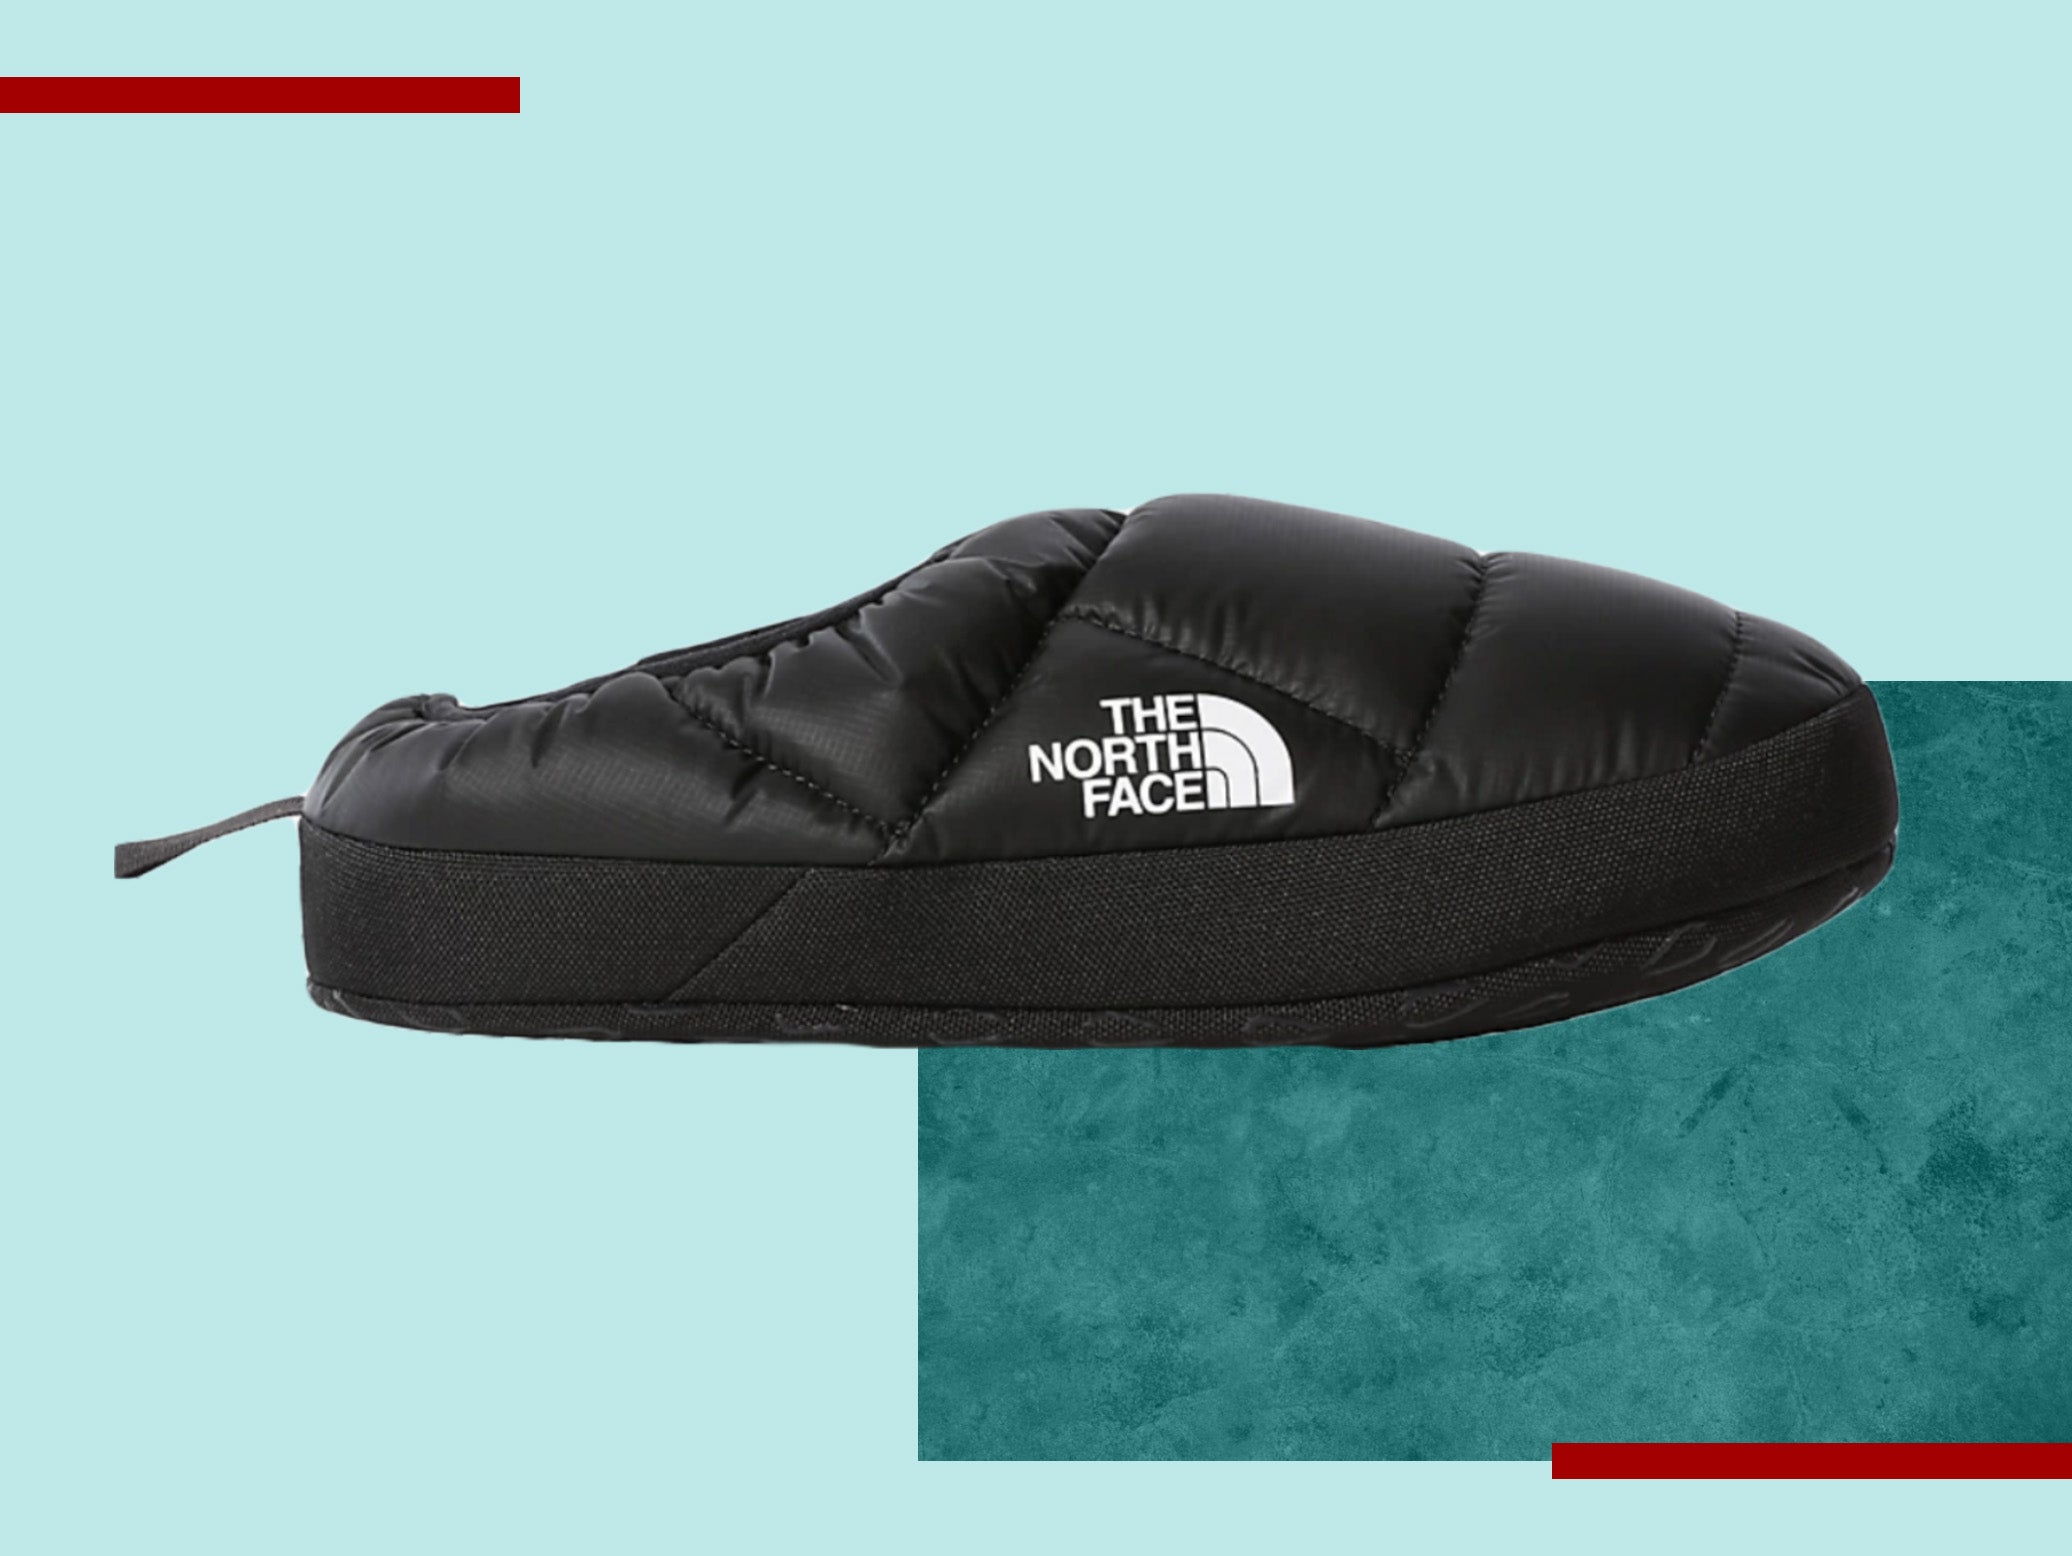 The North Face slippers: Are they worth the hype? | The Independent